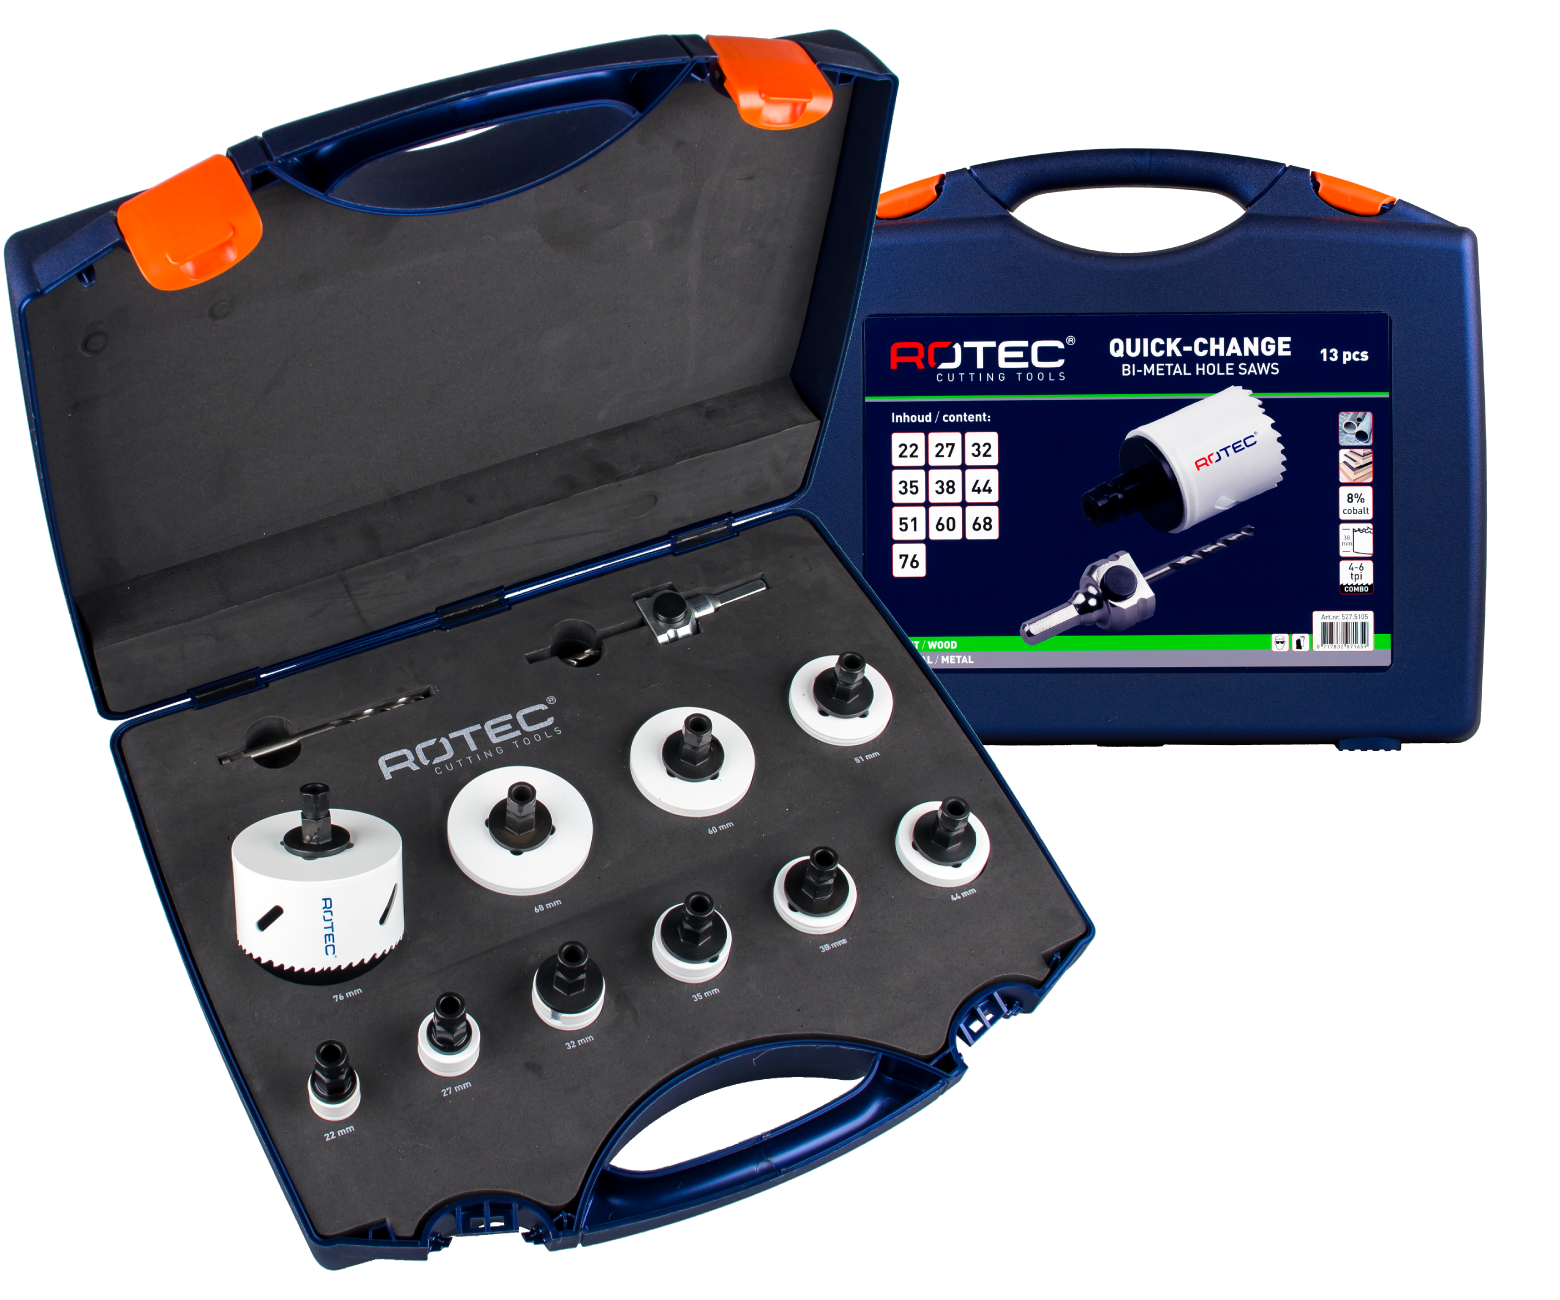 Hole saw set '527 - Electrician' with Quick-Change adapters, 13 pcs